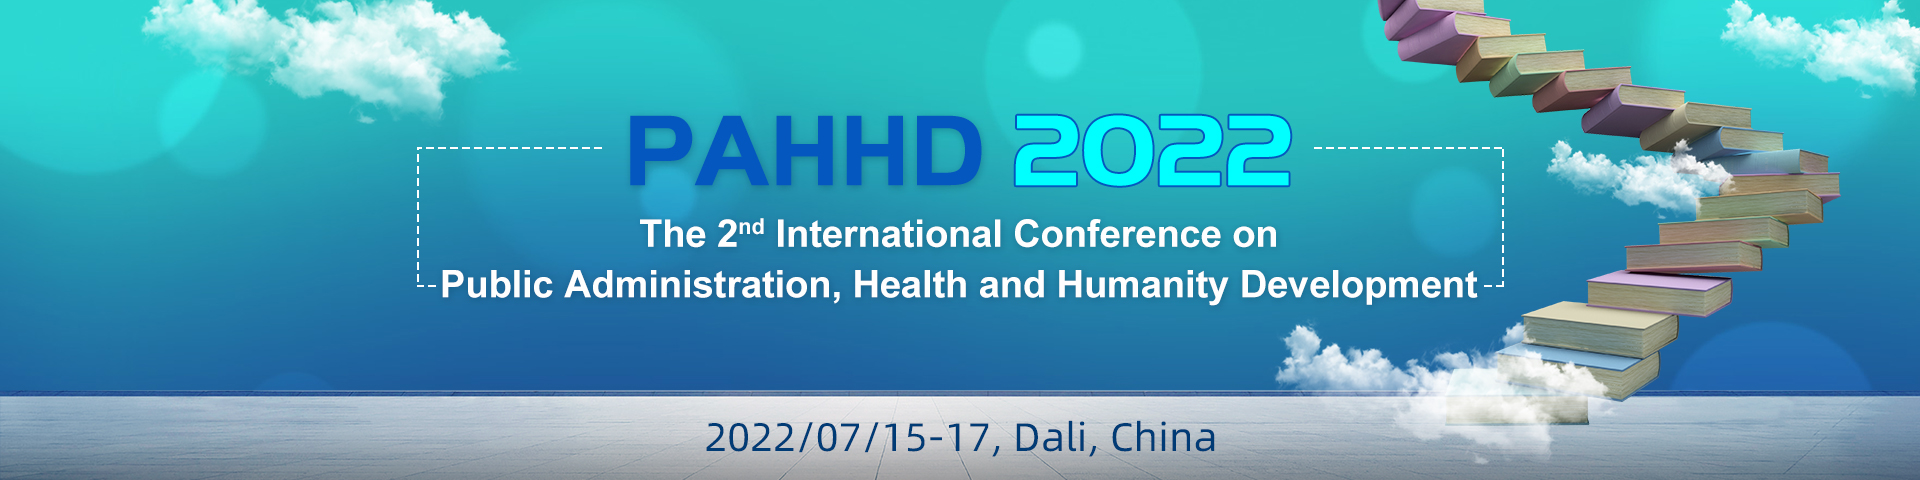 The 2rd International Conference on Public Administration, Health and Humanity Development (PAHHD 2022), Dali, Yunnan, China